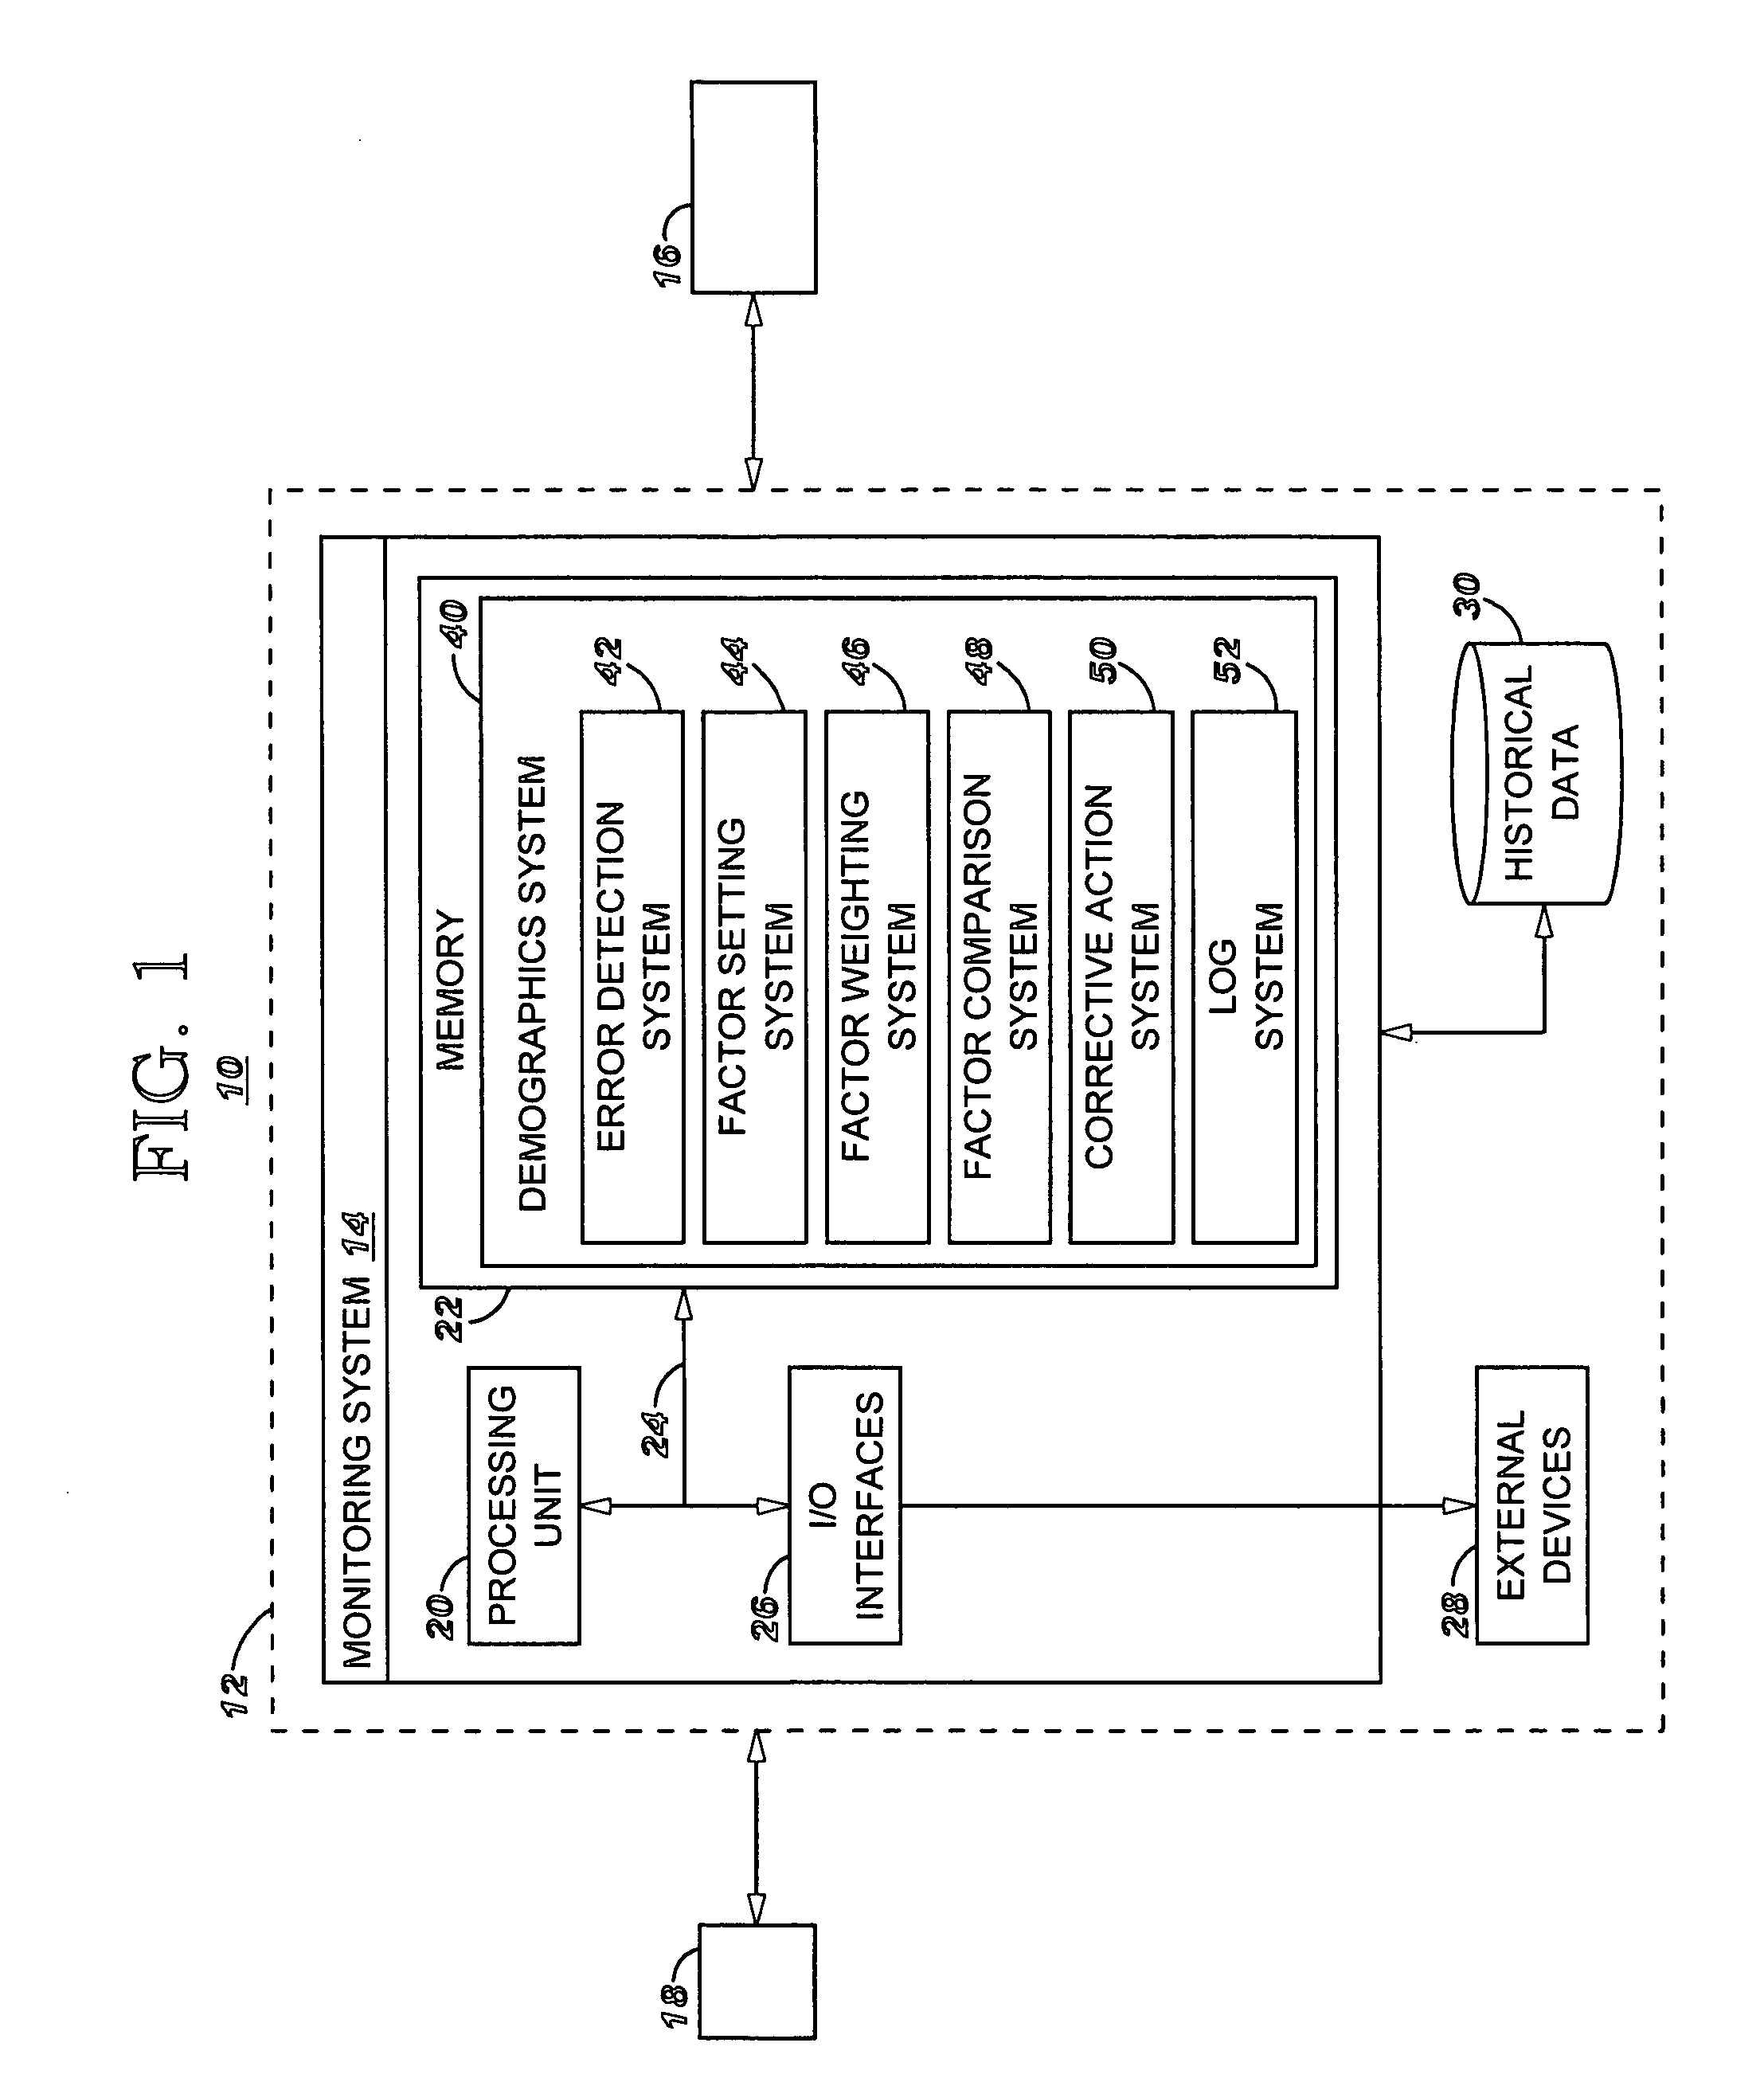 Method, system and program product for analyzing demographical factors of a computer system to address error conditions